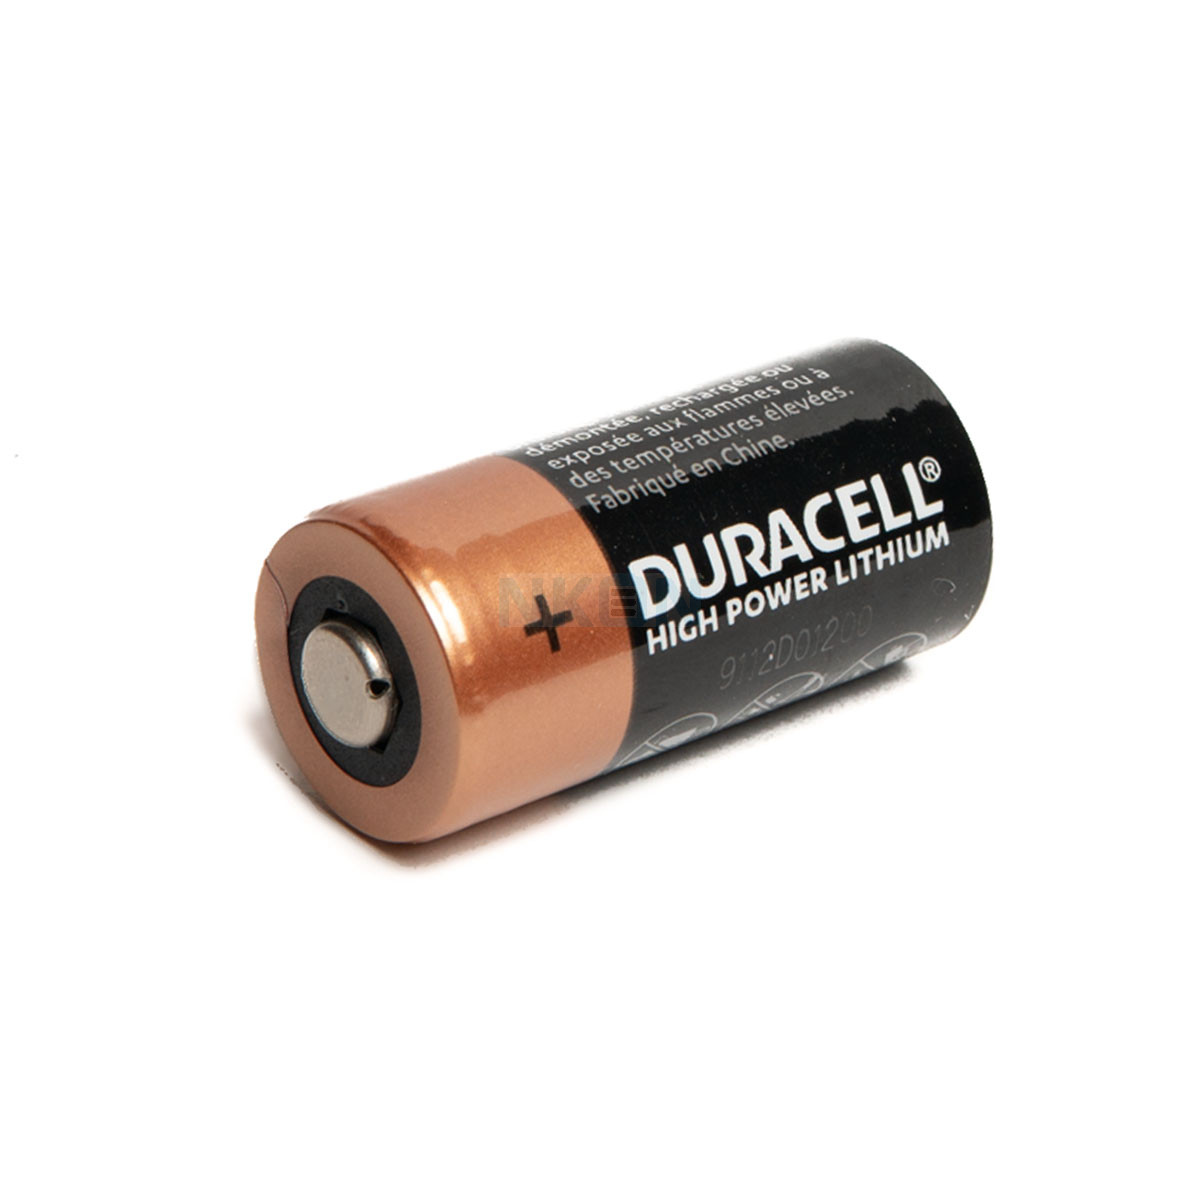 Duracell CR123A 3V Lithium Battery, 1 Count Pack, Long-Lasting Power for  Home Safety and Security Devices, High-Intensity Flashlights, and More